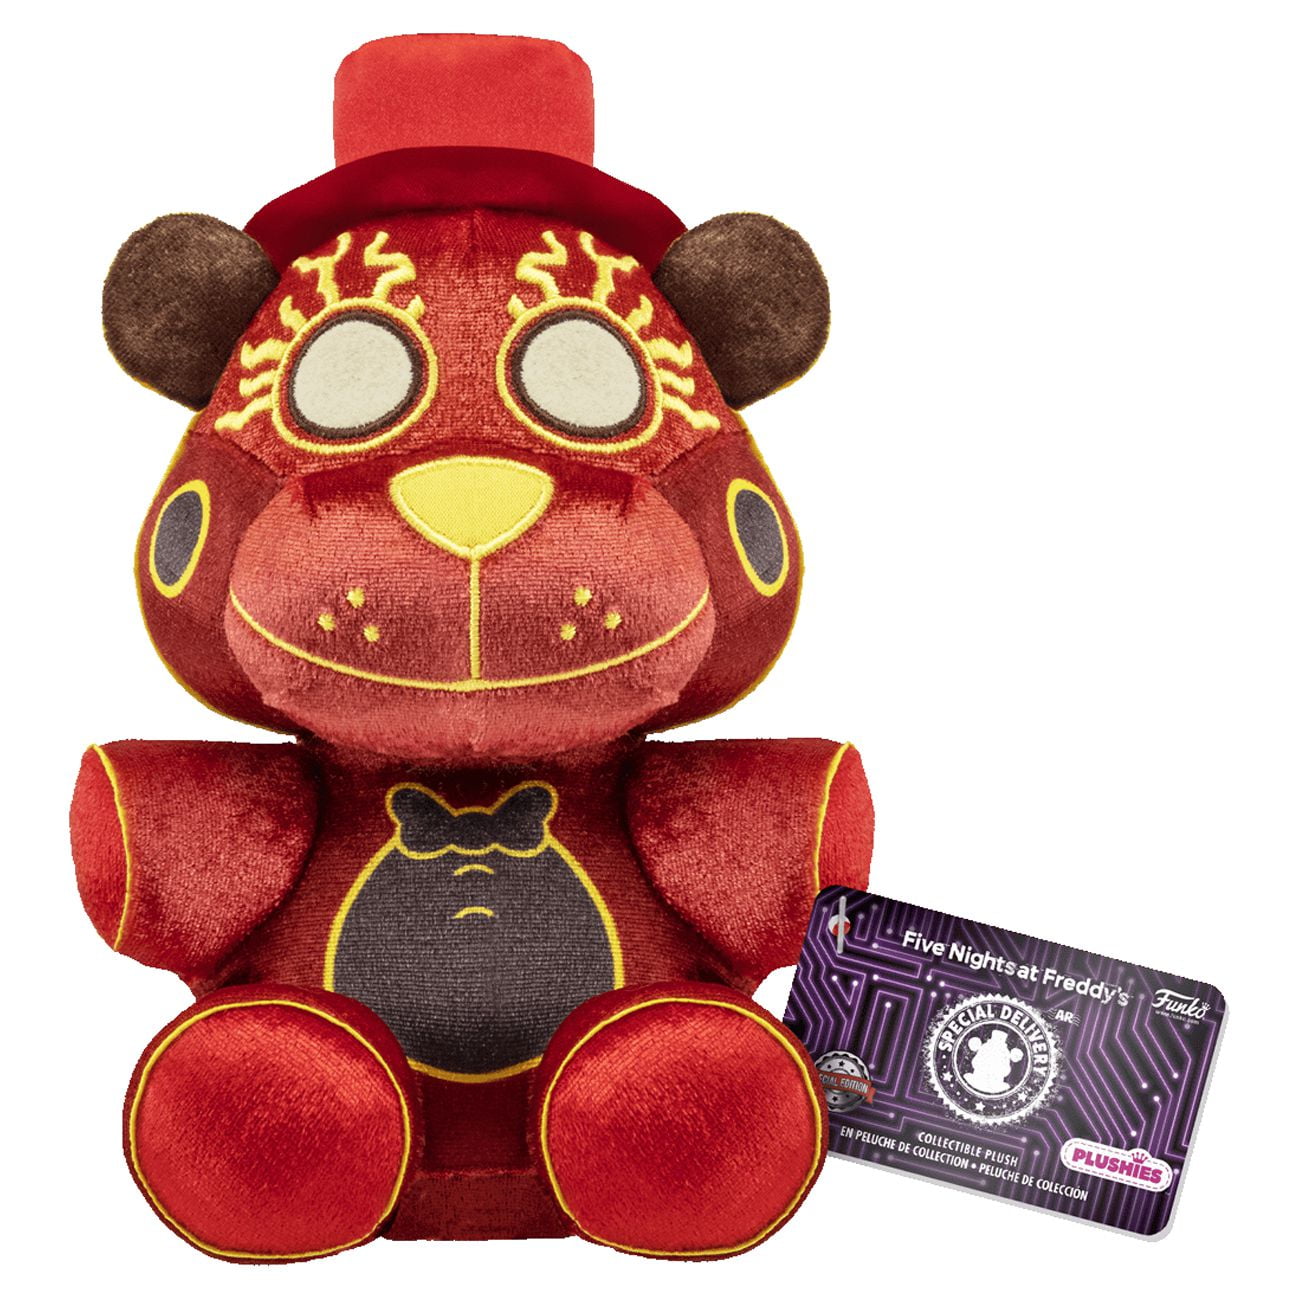 NEW FNAF Plush Doll Five Nights at Freddy's Game Ation Figure Monster Doll  Toys